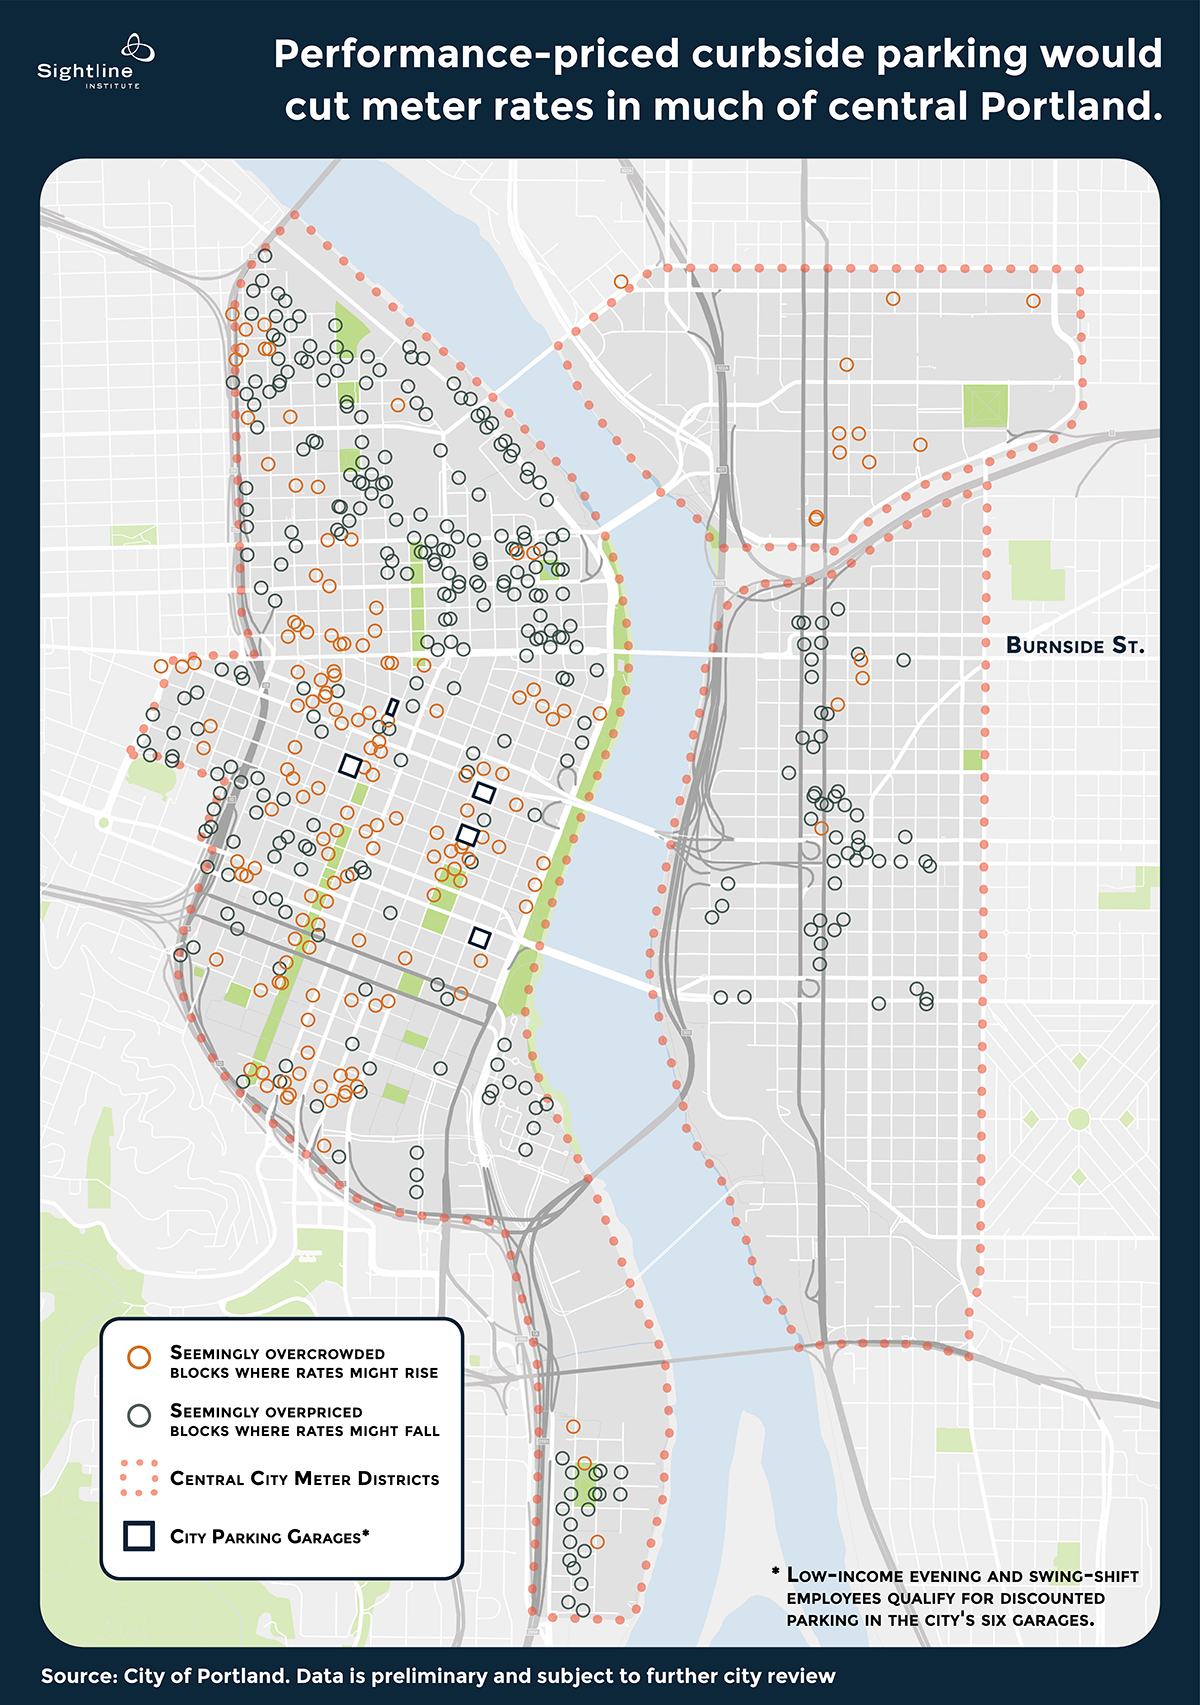 Portland Might Spend Twice as Much on Free Parking Lots as Affordable  Housing along Its Next Rail Line - Sightline Institute